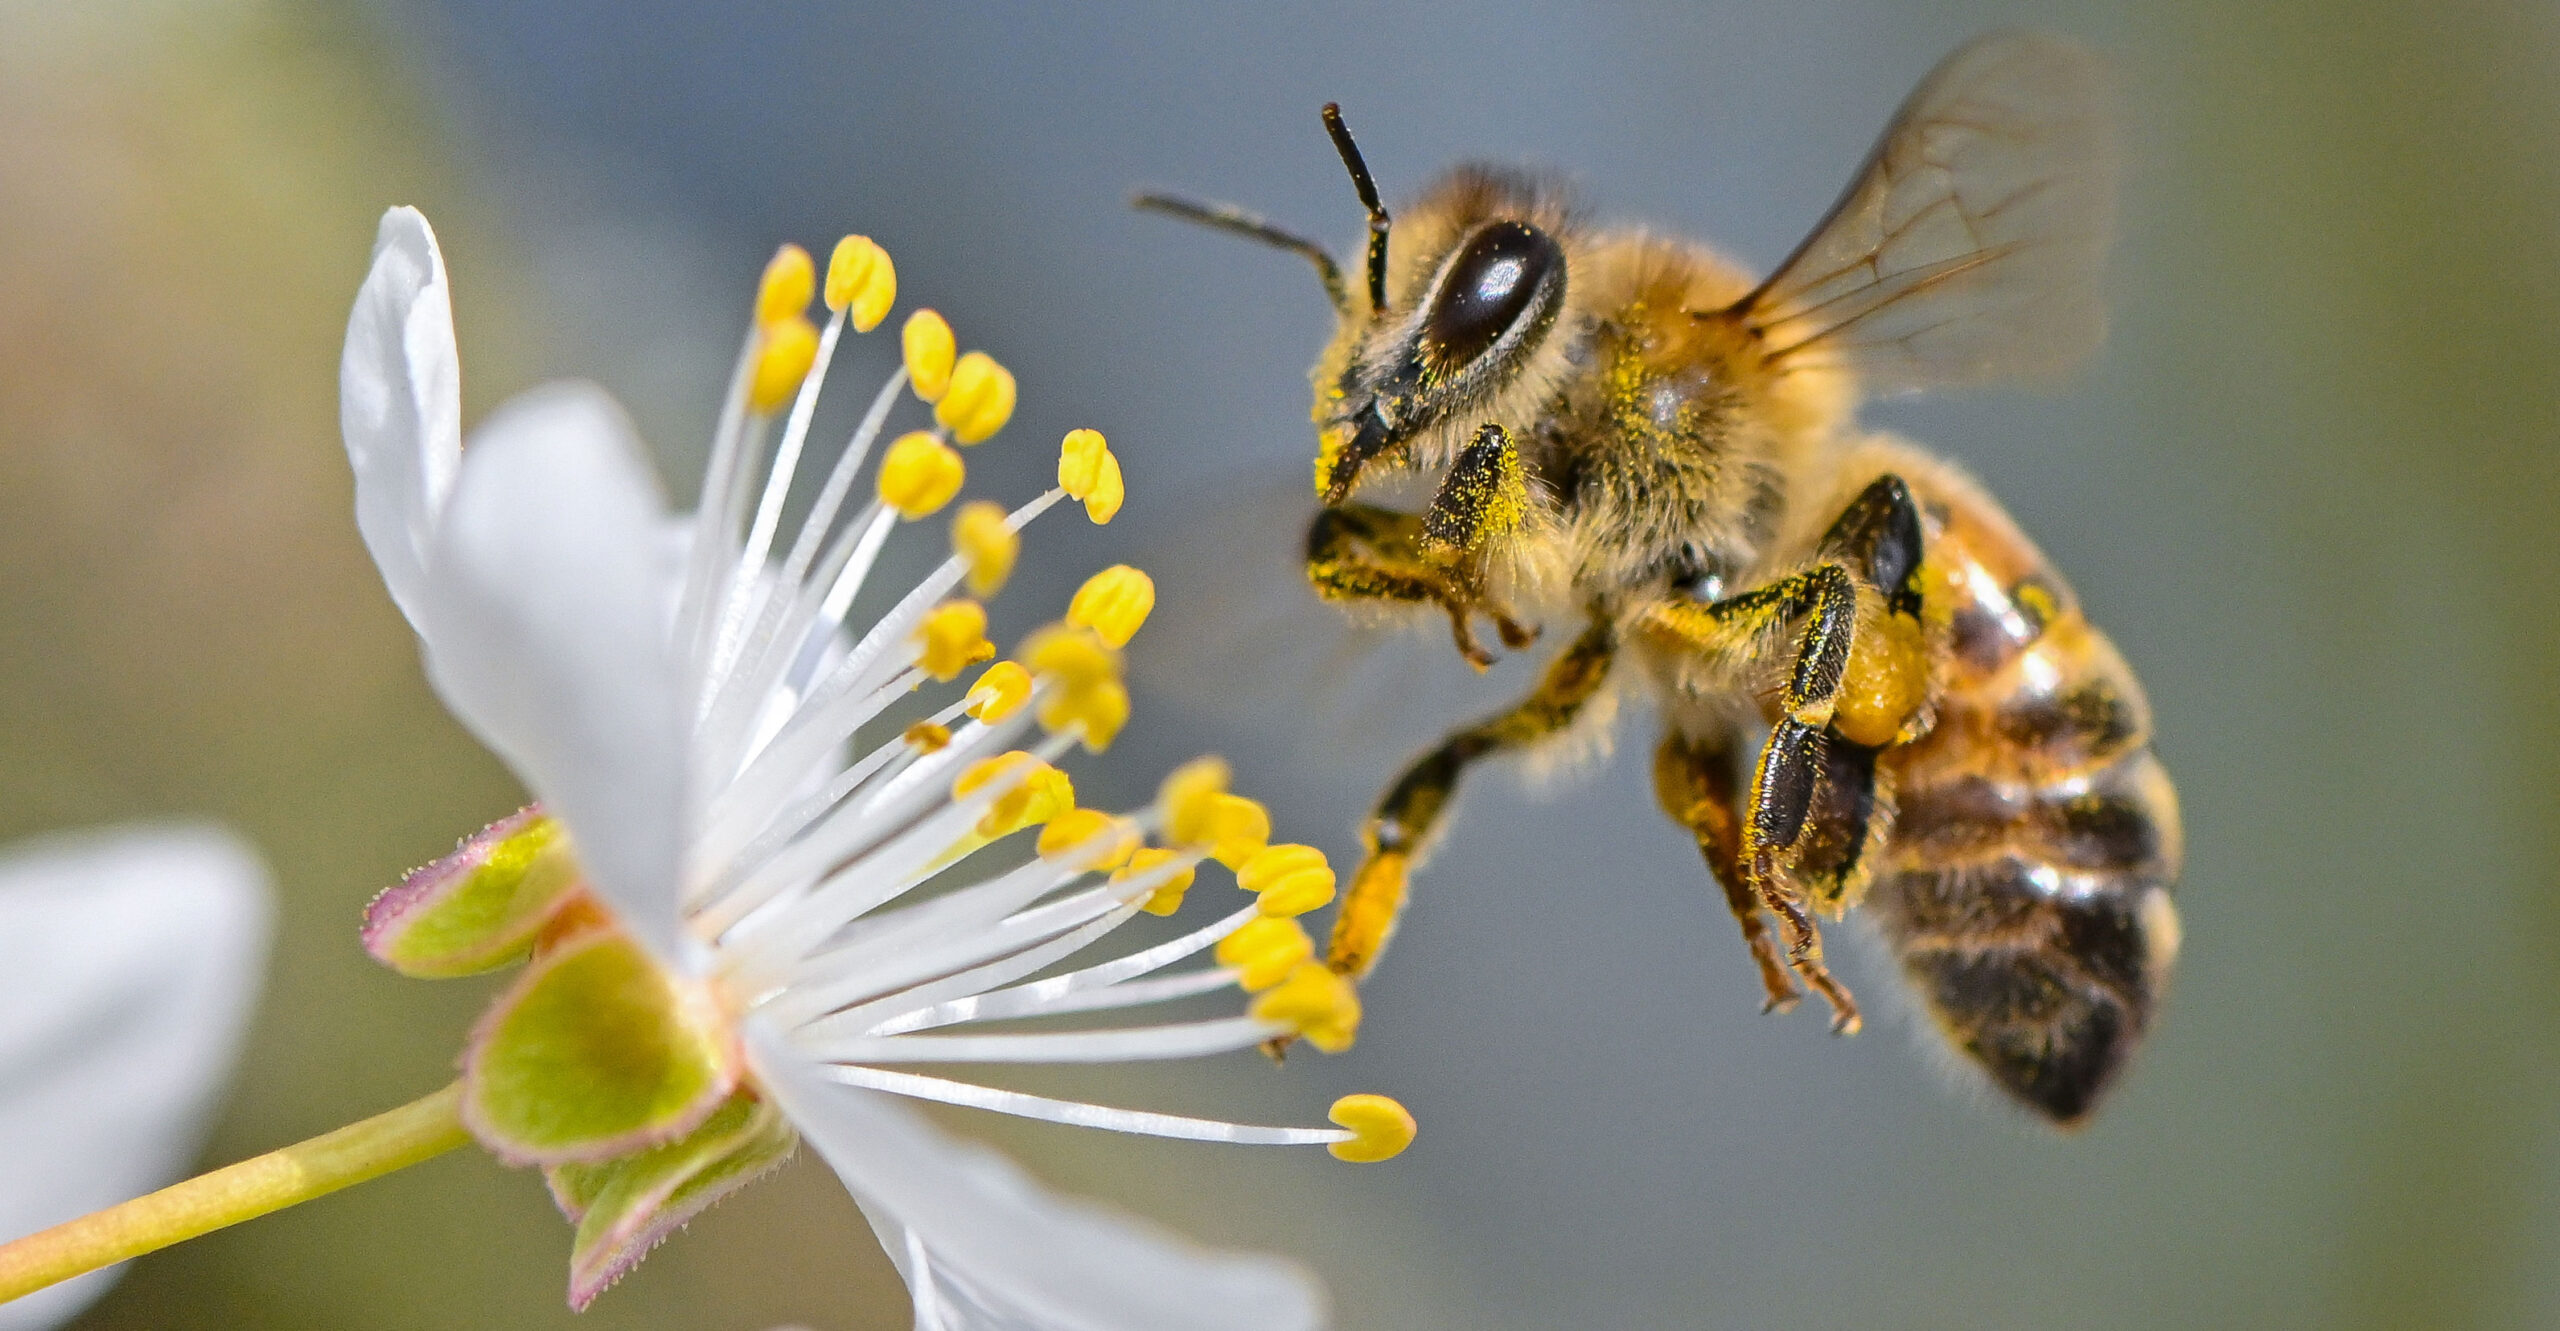 Scientist Challenges Hysterical 'Bee-pocalypse' Claims